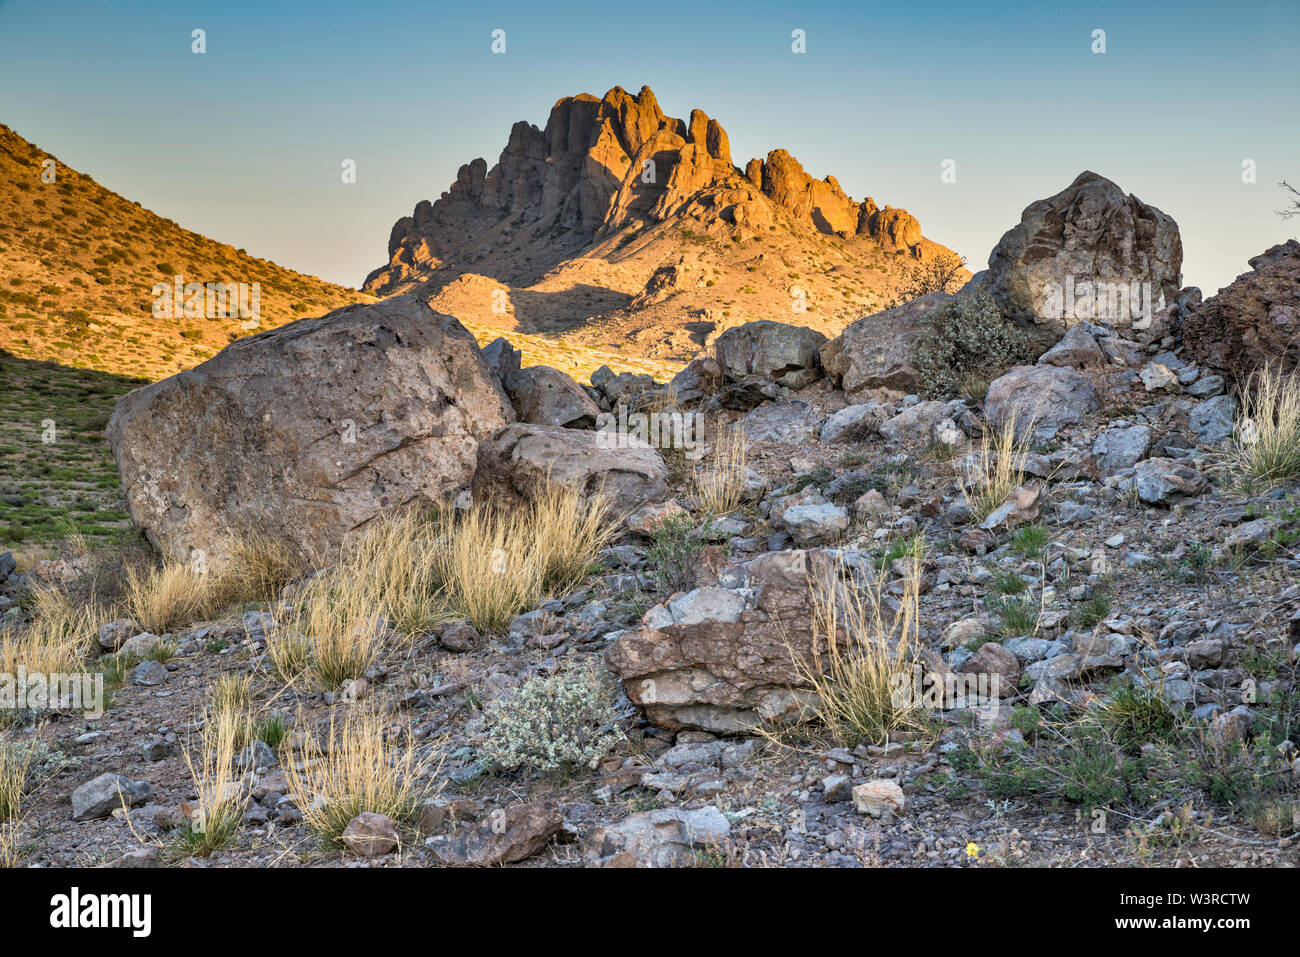 Mountain at Florida Mountains, Chihuahuan Desert, near Rockhound State Park near Deming, New Mexico, USA Stock Photo